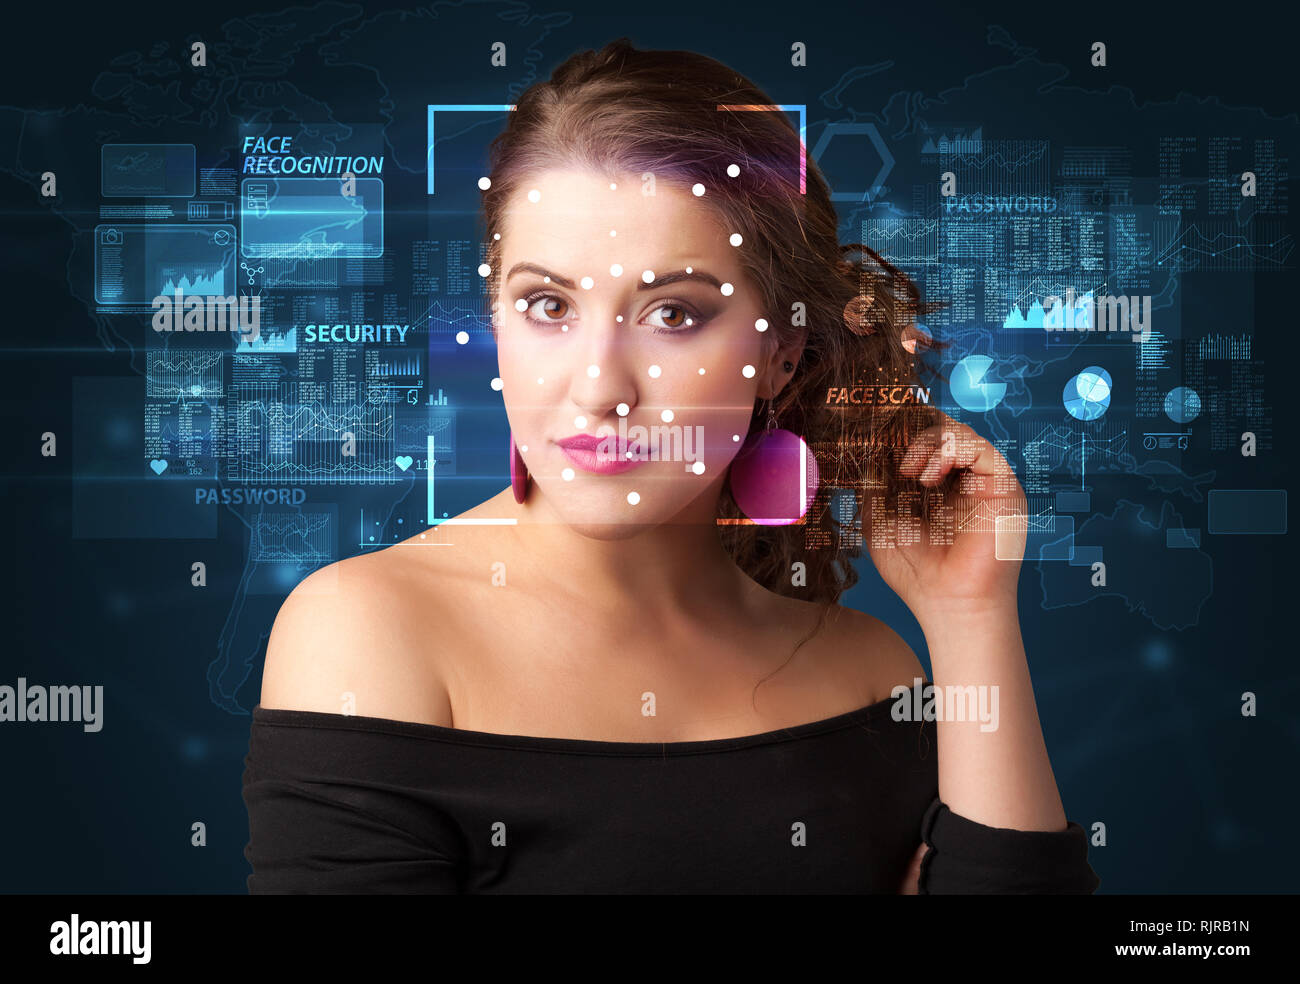 Digital Face Recognition System concept Stock Photo